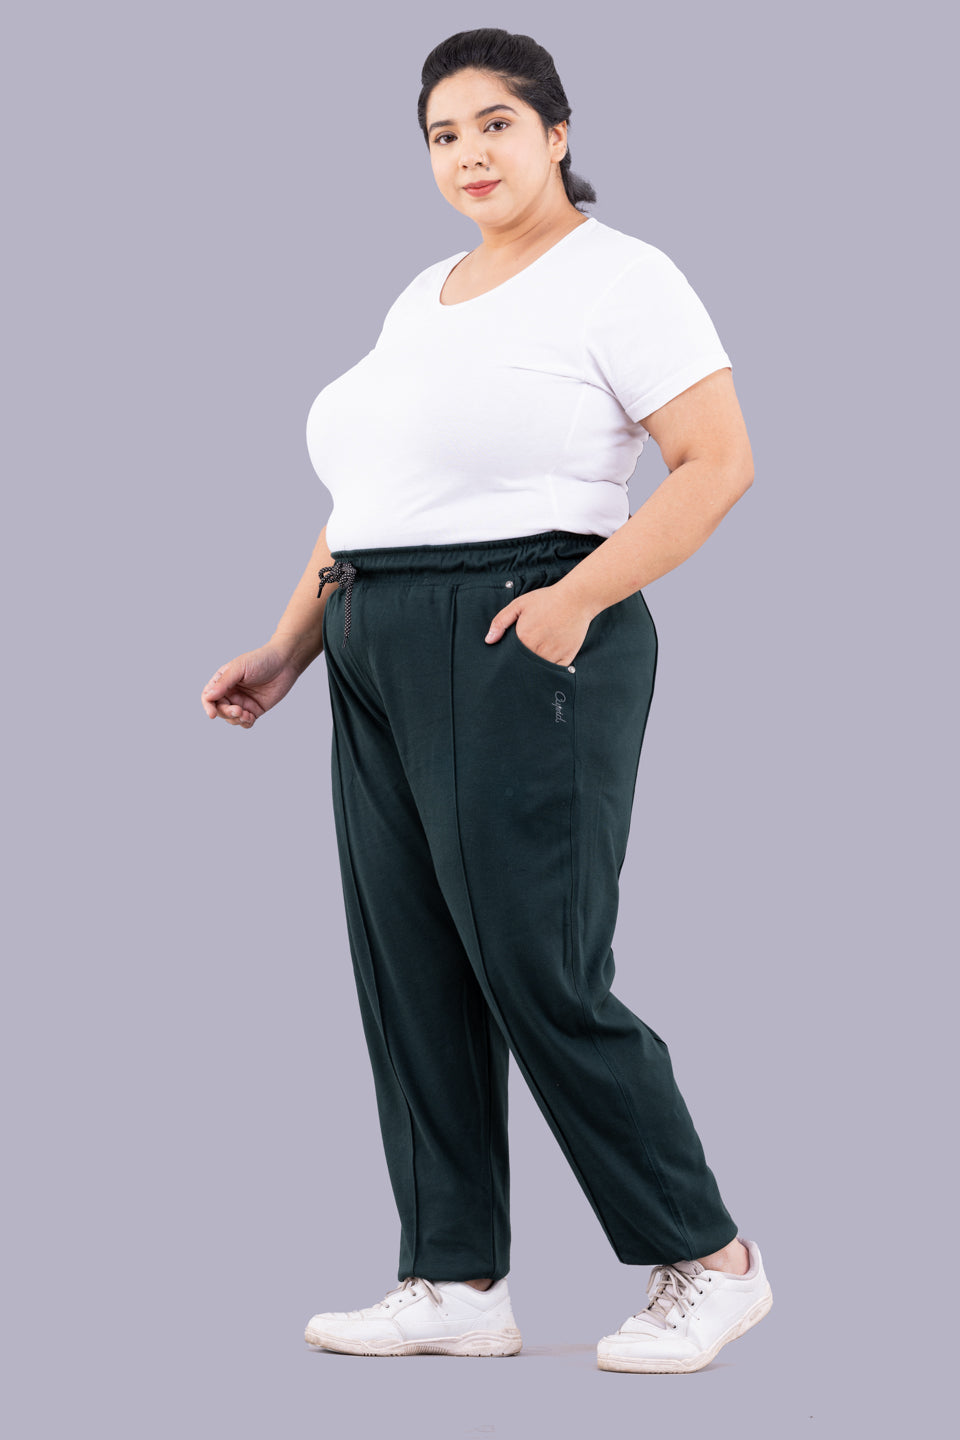 Comfy Bottle Green Relaxed Fit Cotton Lounge pants for Women online in India at best prices